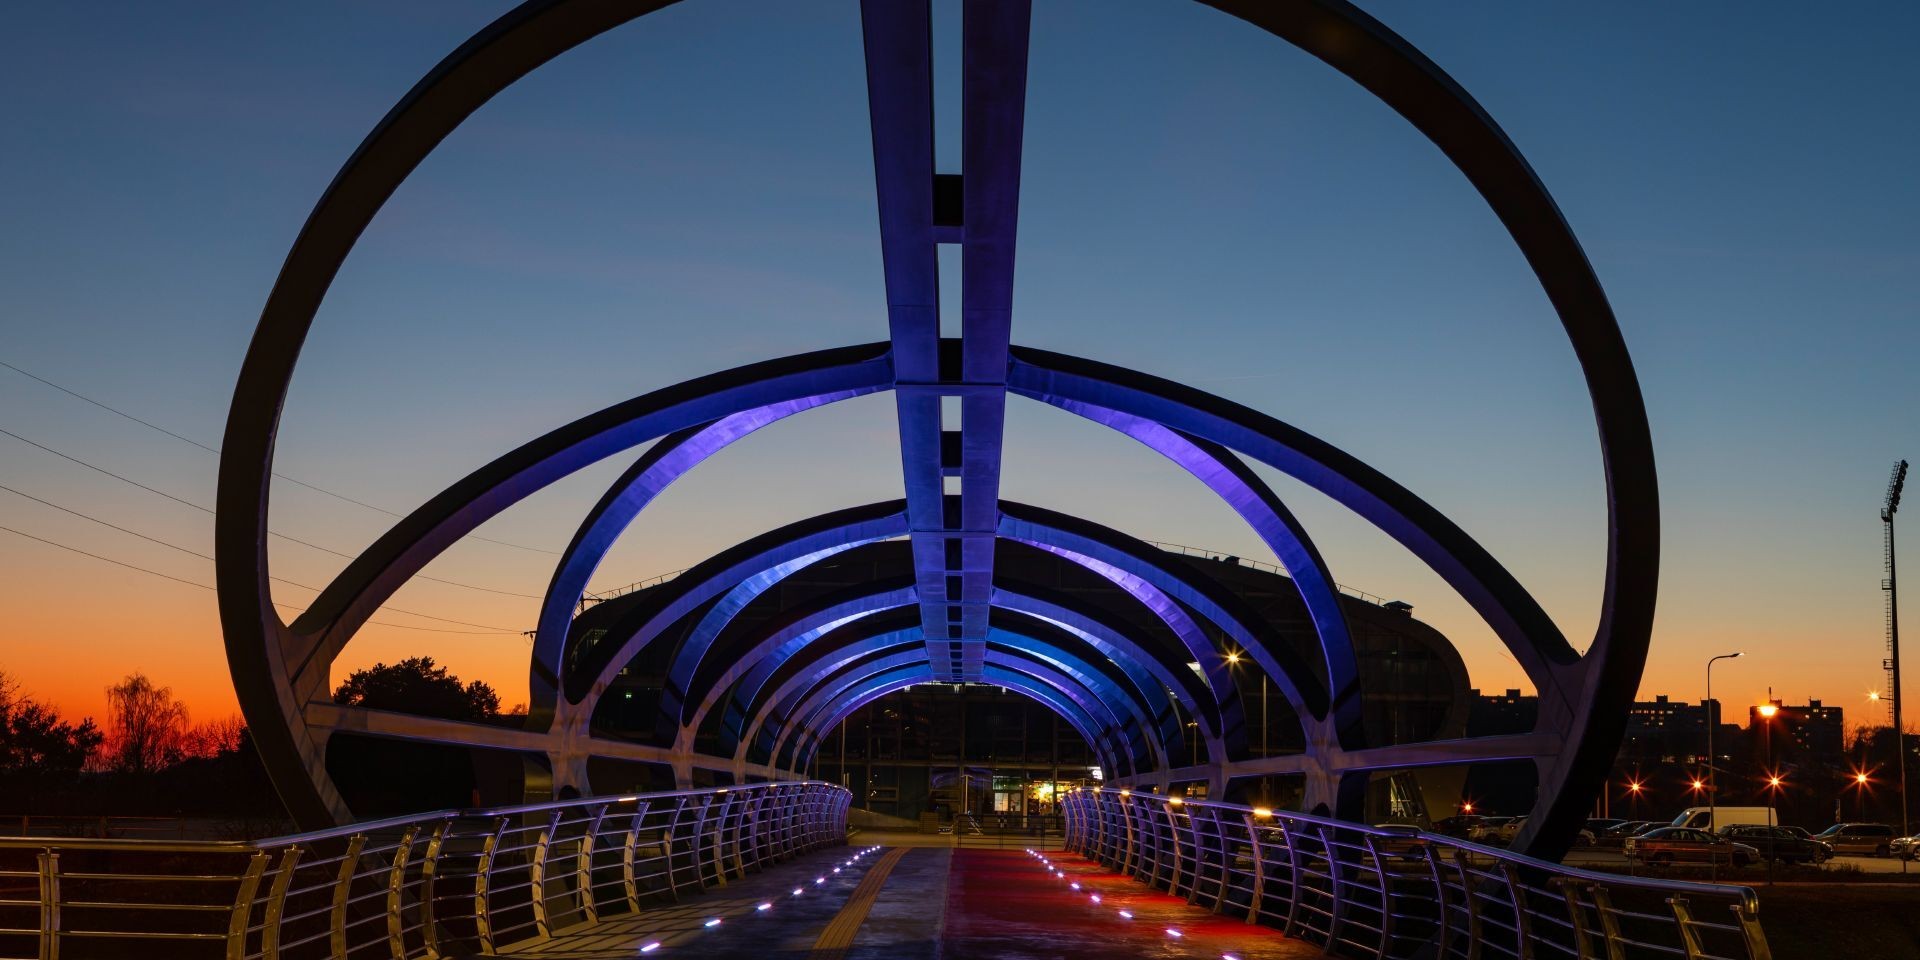 Smart and colourful pedestrian bridge attracts attention with its futuristic form